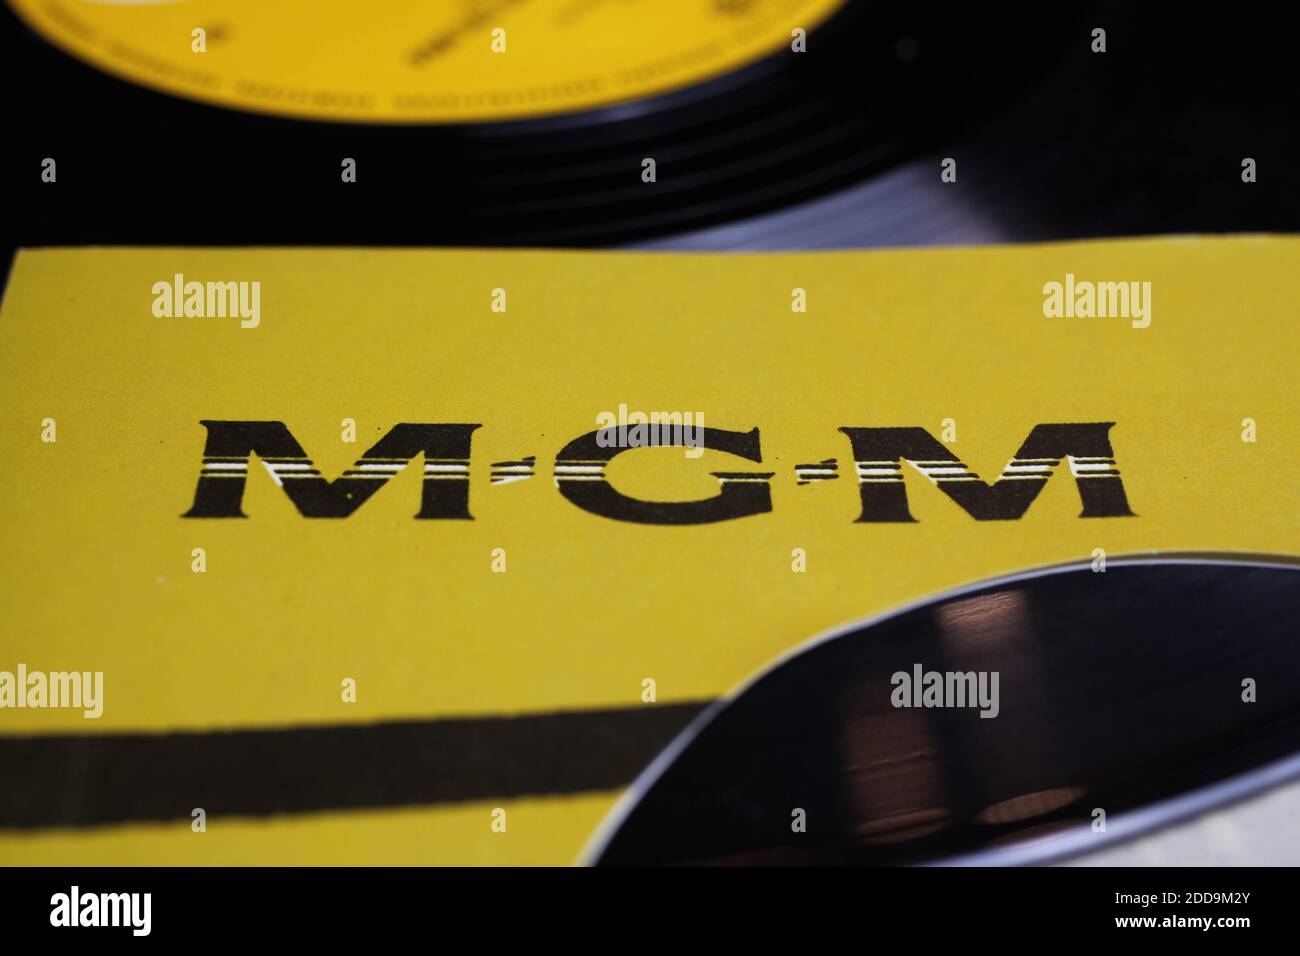 Viersen, Germany - May 9. 2020: Close up of isolated vinyl single record cover with logo from mgm music label Stock Photo